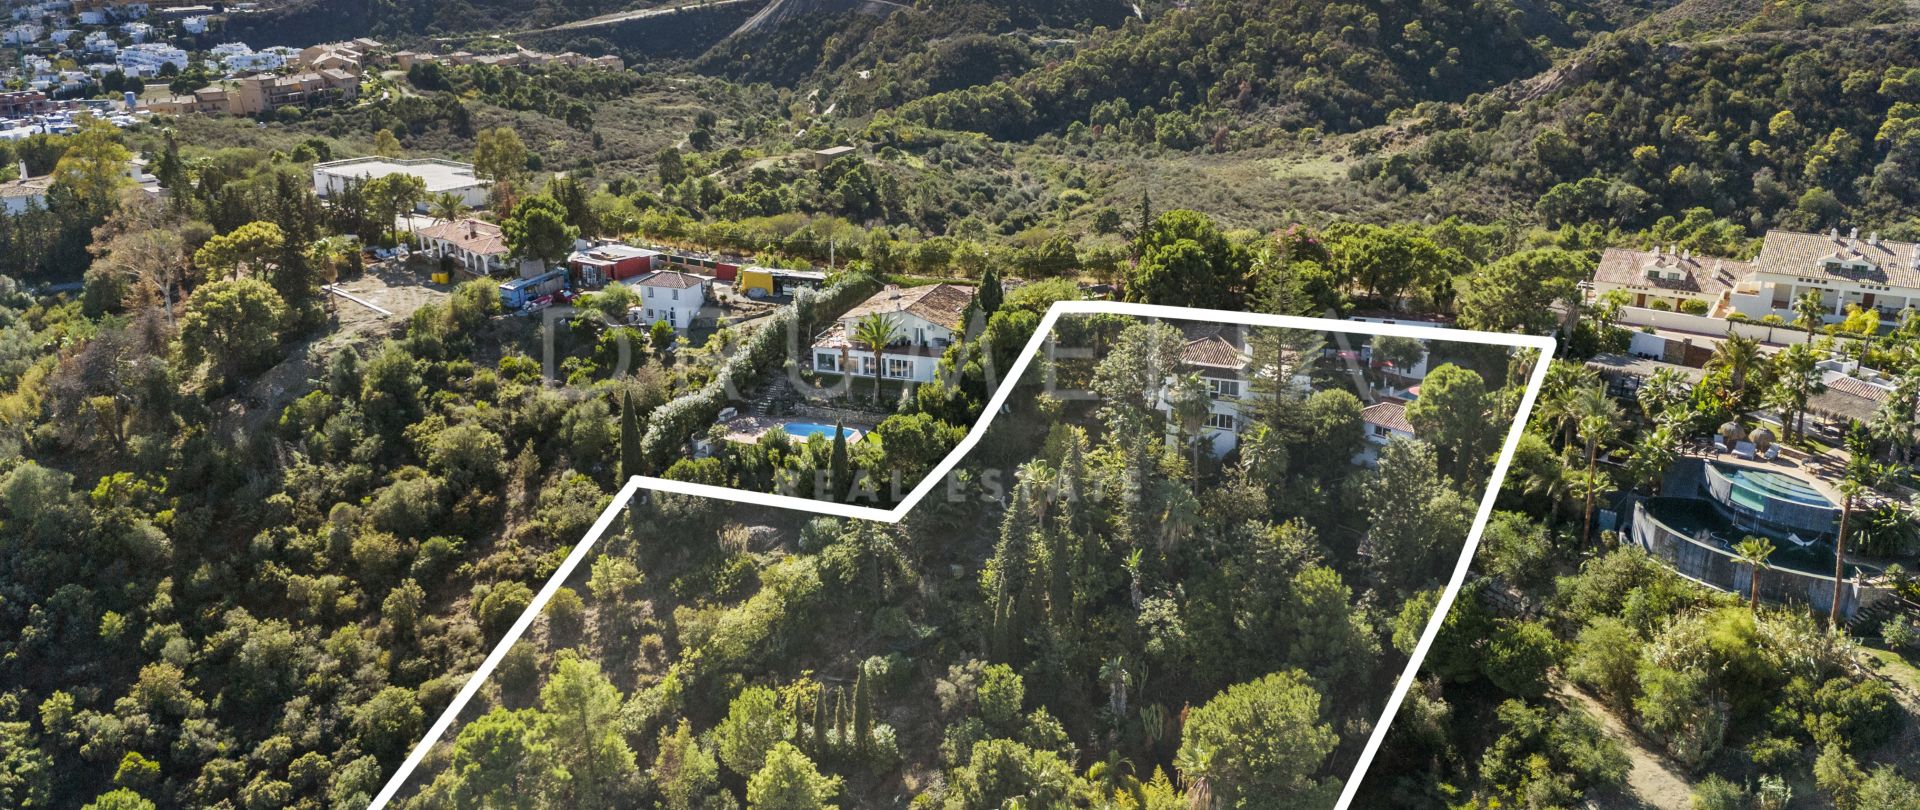 Attractive Mediterranean villa with great potential, large plot and nice view, Benahavis.